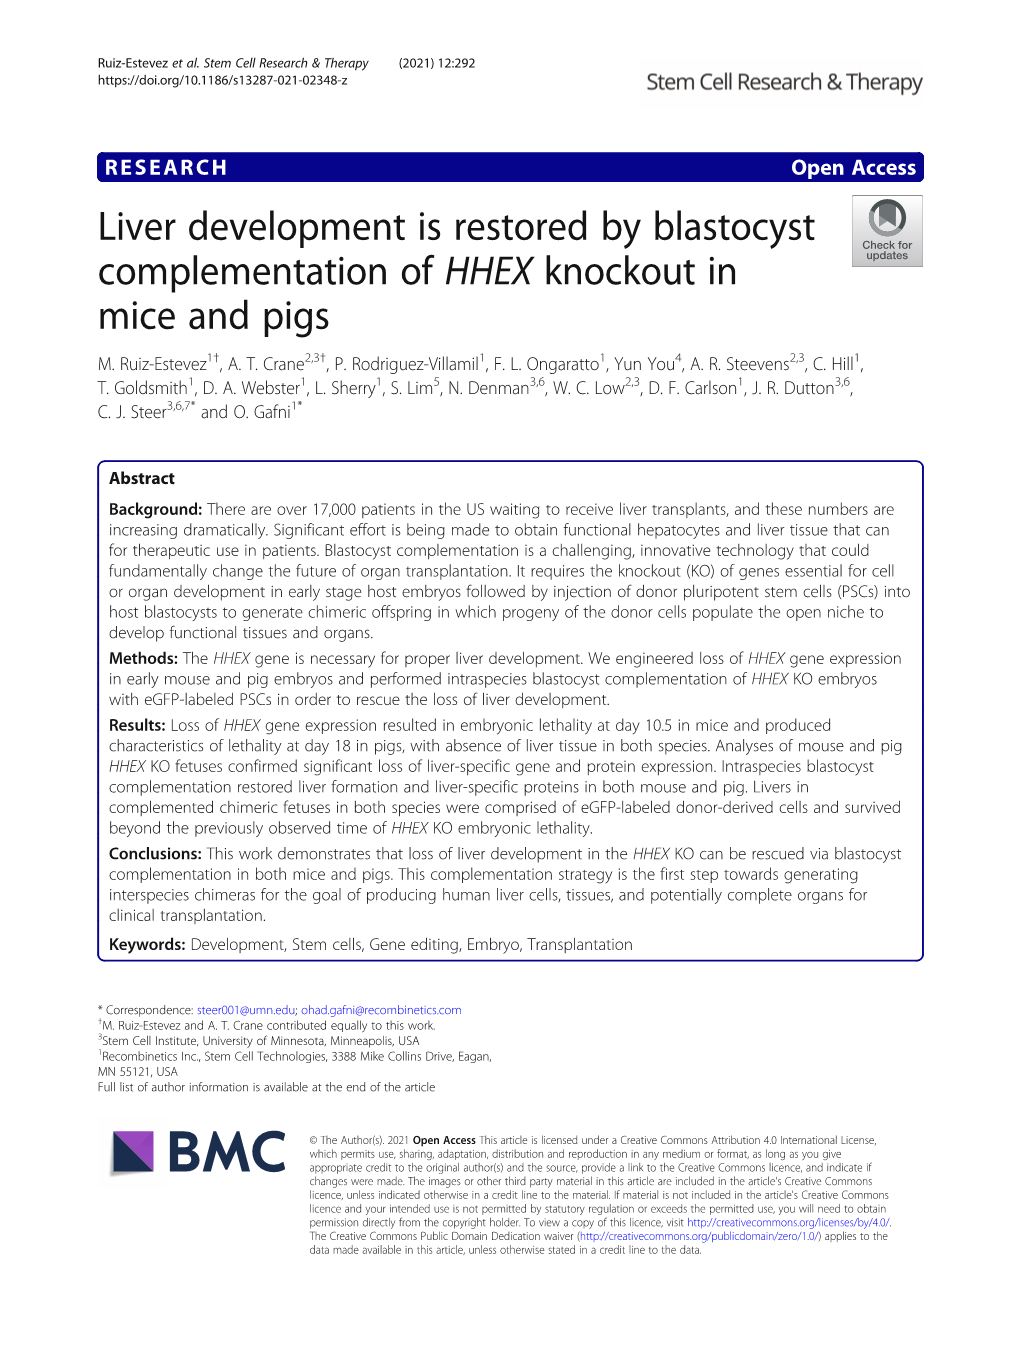 Liver Development Is Restored by Blastocyst Complementation of HHEX Knockout in Mice and Pigs M